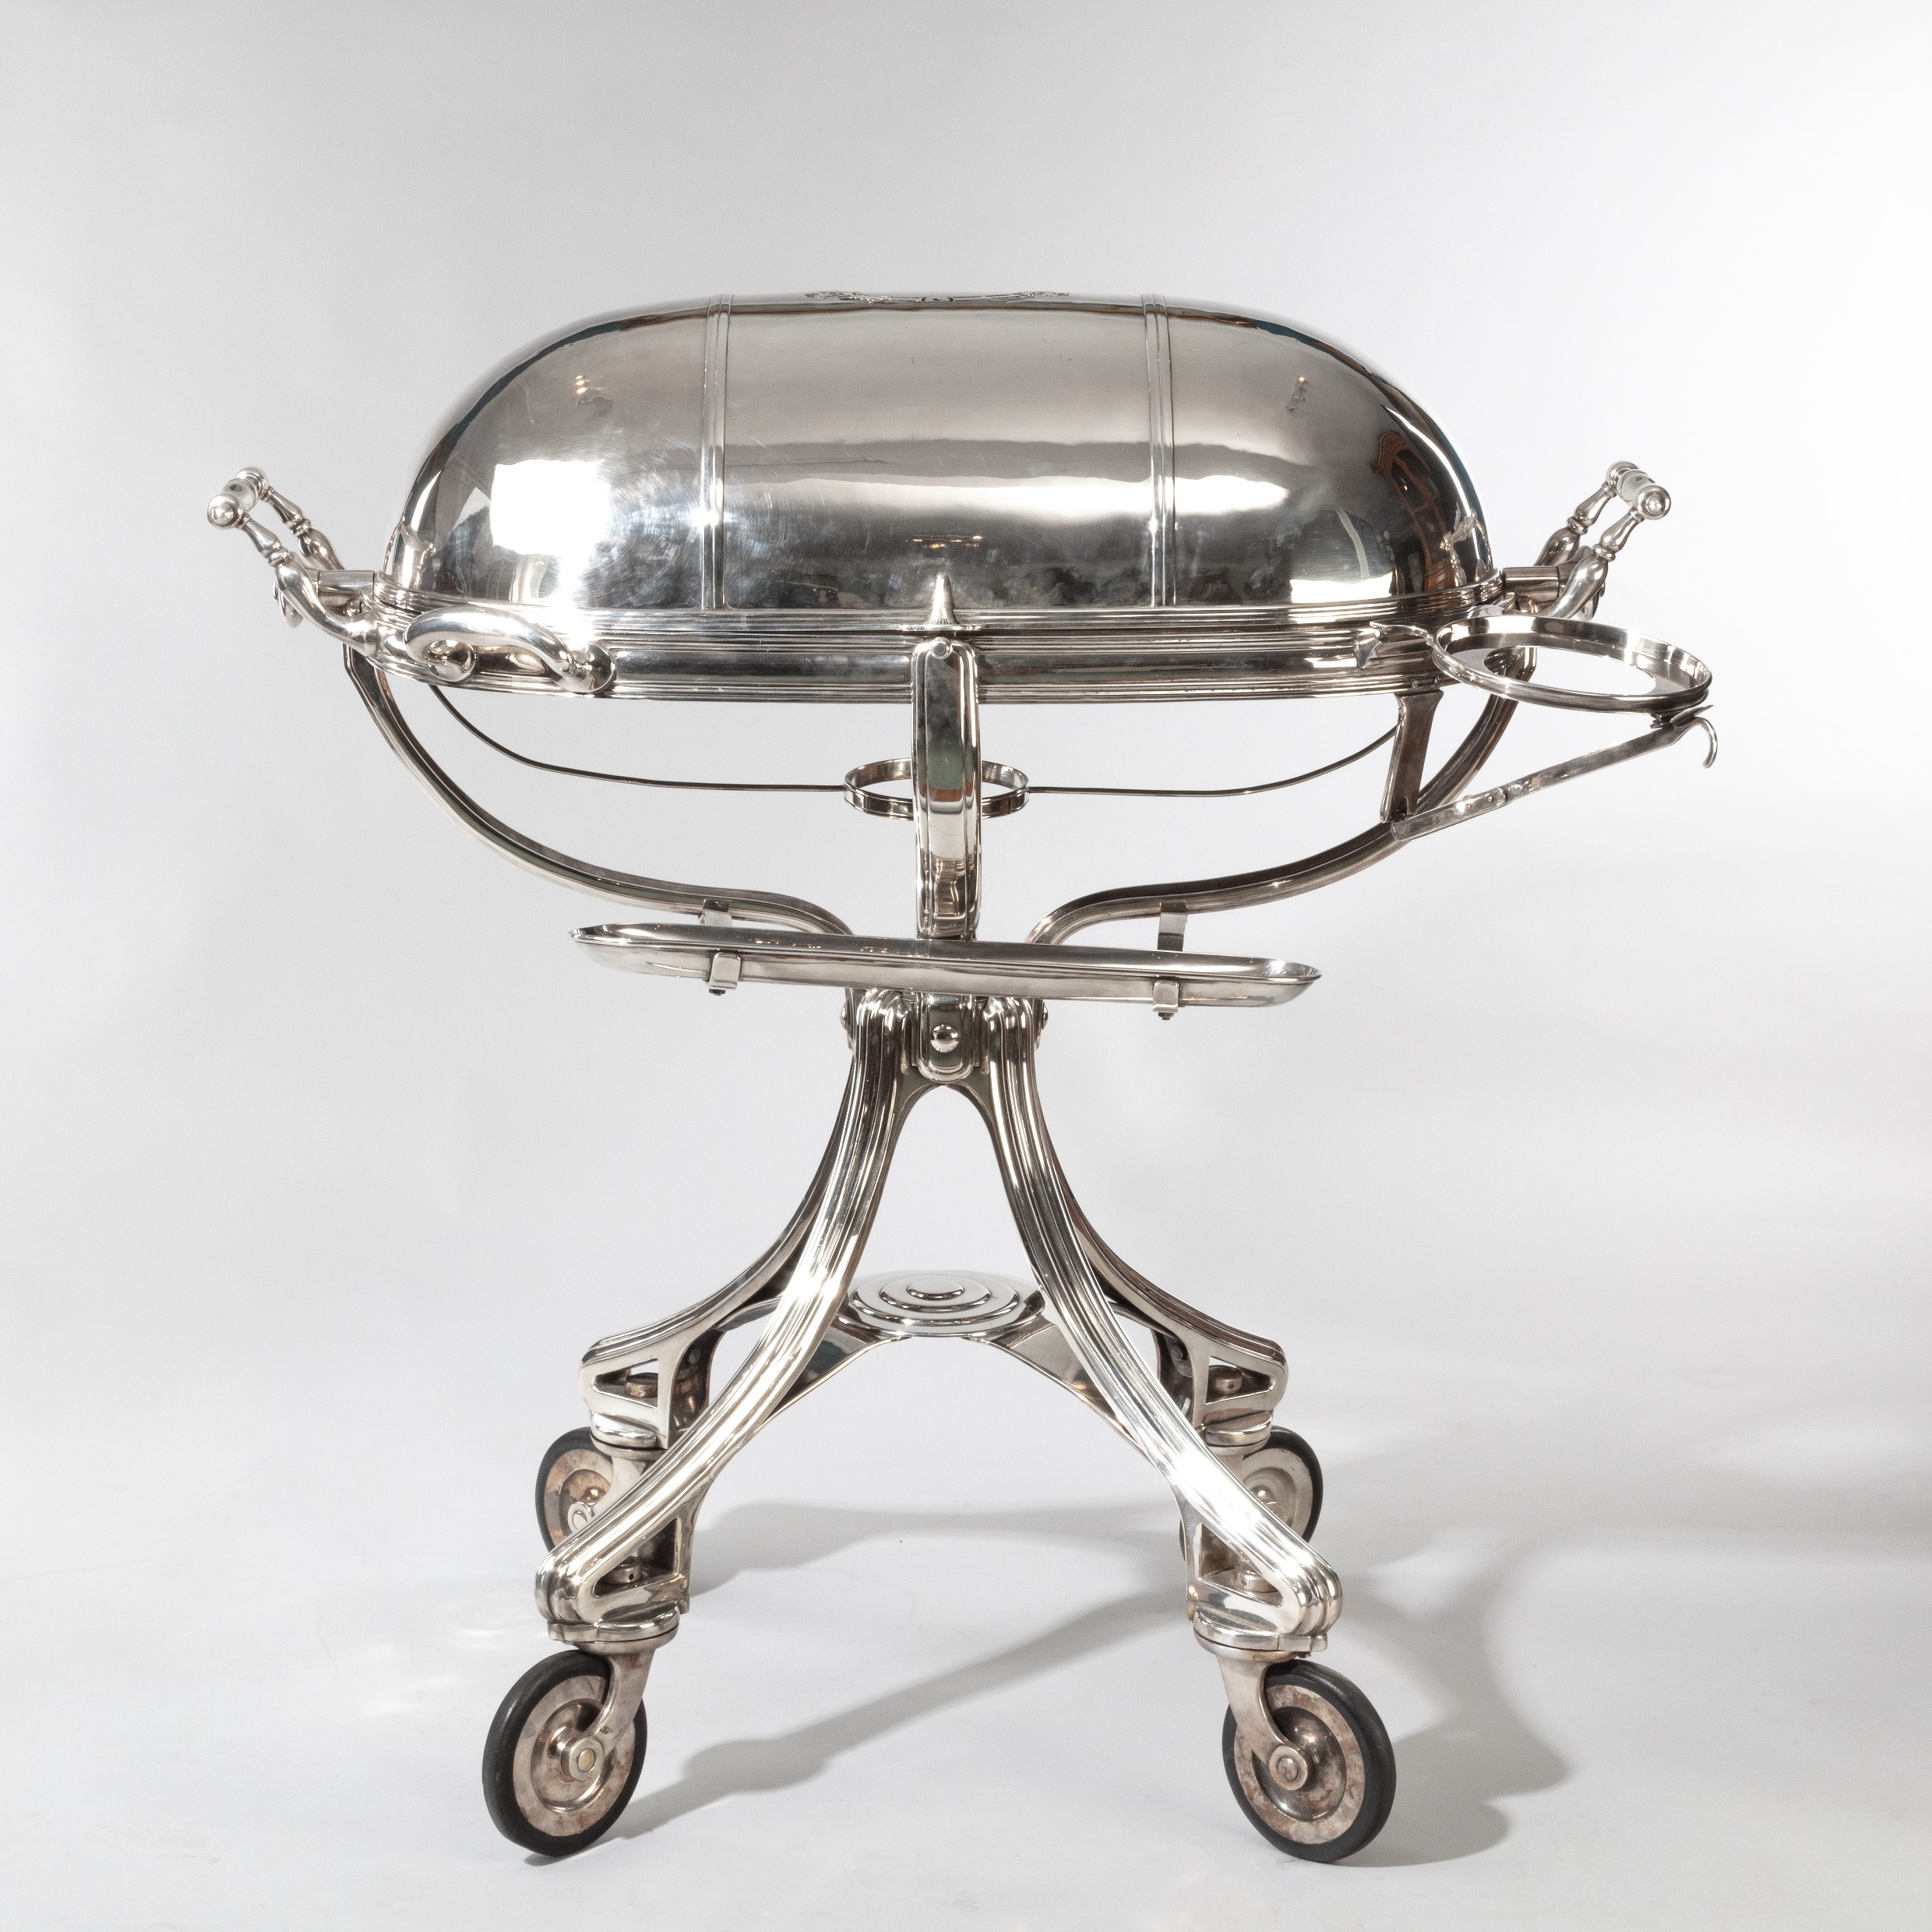 A large silver plate carving trolley or roast beef trolley by Erguis